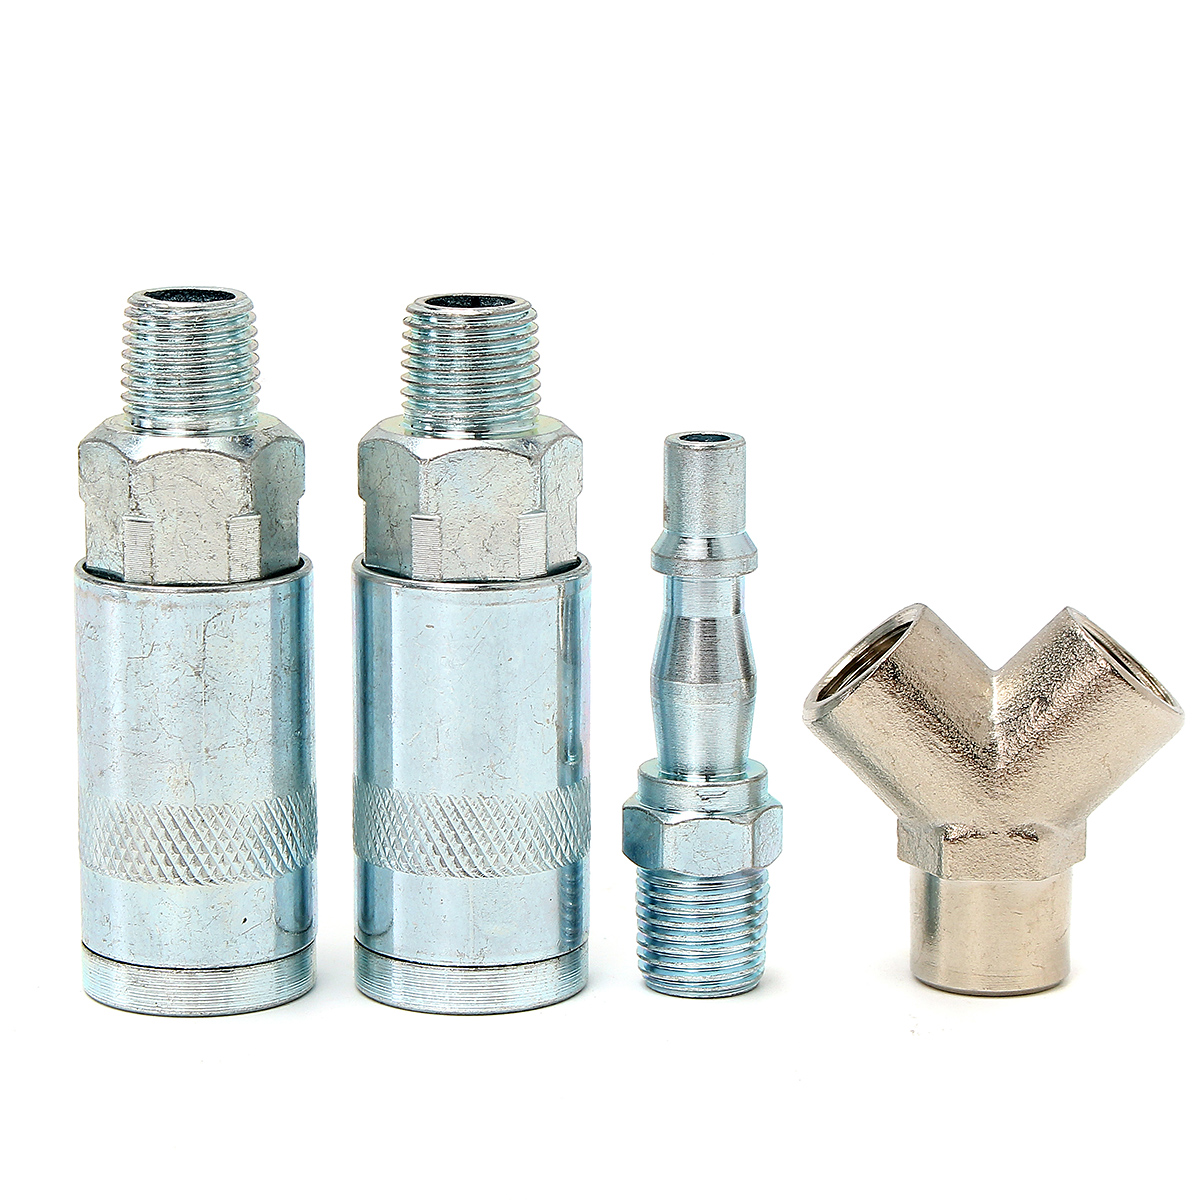 

3 Way Quick Release Adapter 1/4 Inch BSP Air Line Hose Y Splitter Connector Airline Coupling